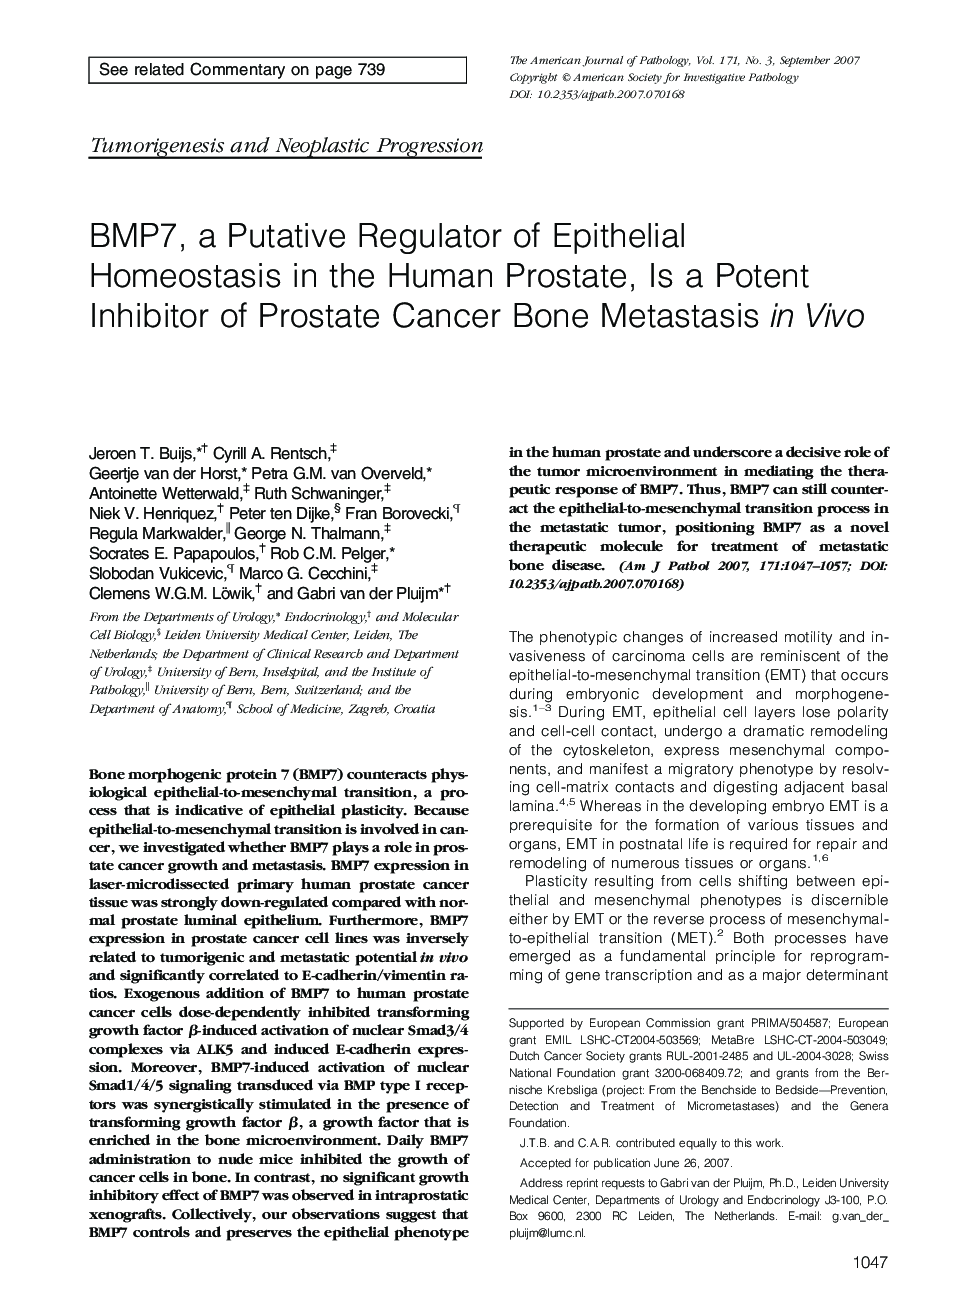 Regular ArticlesBMP7, a Putative Regulator of Epithelial Homeostasis in the Human Prostate, Is a Potent Inhibitor of Prostate Cancer Bone Metastasis in Vivo